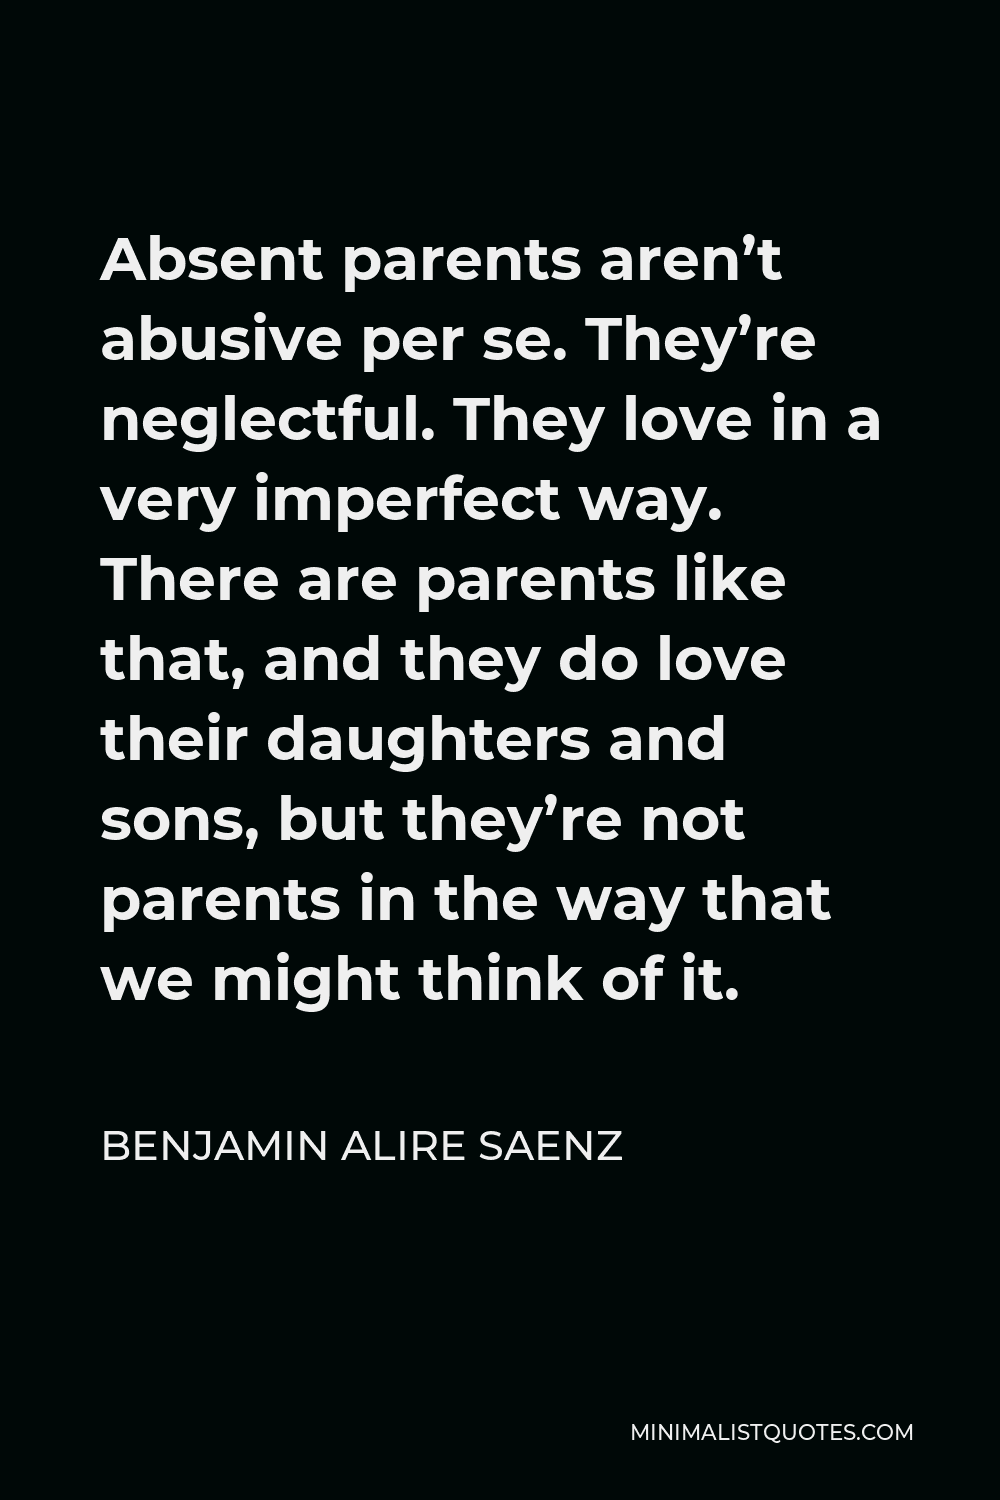 Benjamin Alire Saenz Quote - Absent parents aren’t abusive per se. They’re neglectful. They love in a very imperfect way. There are parents like that, and they do love their daughters and sons, but they’re not parents in the way that we might think of it.